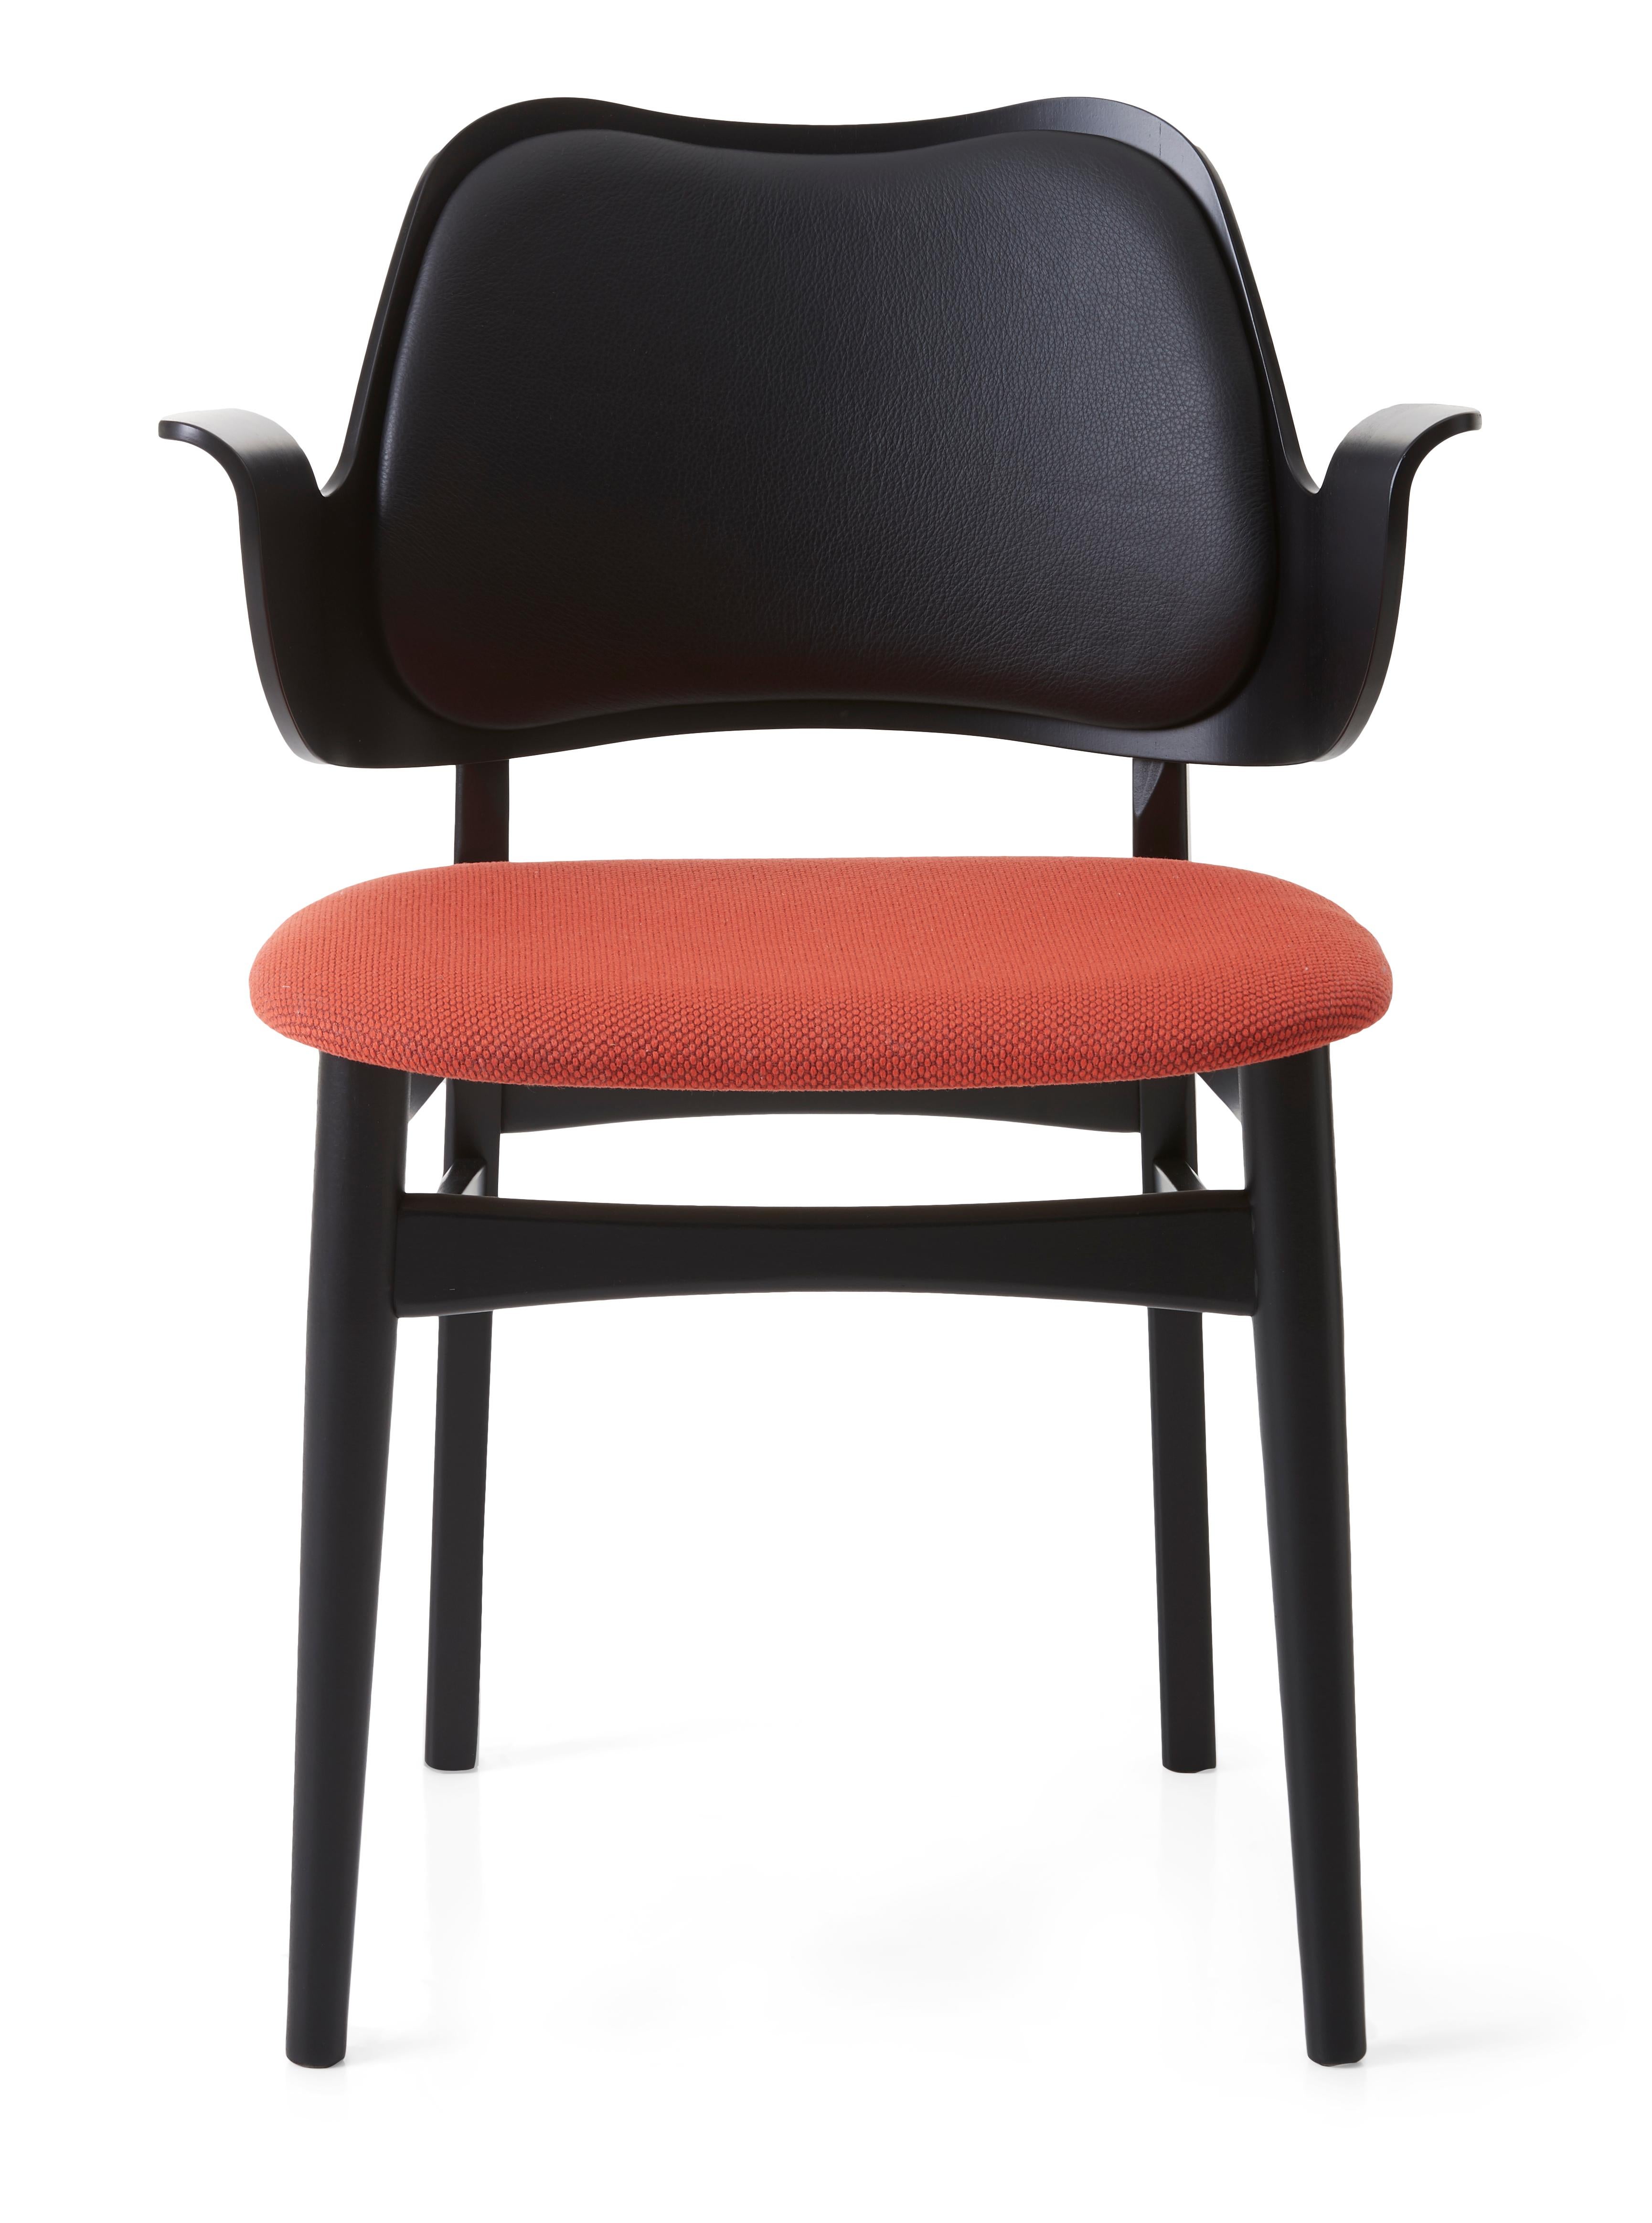 Gesture chair black beech poppy red black leather by Warm Nordic
Dimensions: D56 x W53 x H 80 cm
Material: Teak or white oiled solid oak, Black lacquered solid beech, Veneer seat and back, textile and leather upholstery
Weight: 7.5 kg
Also